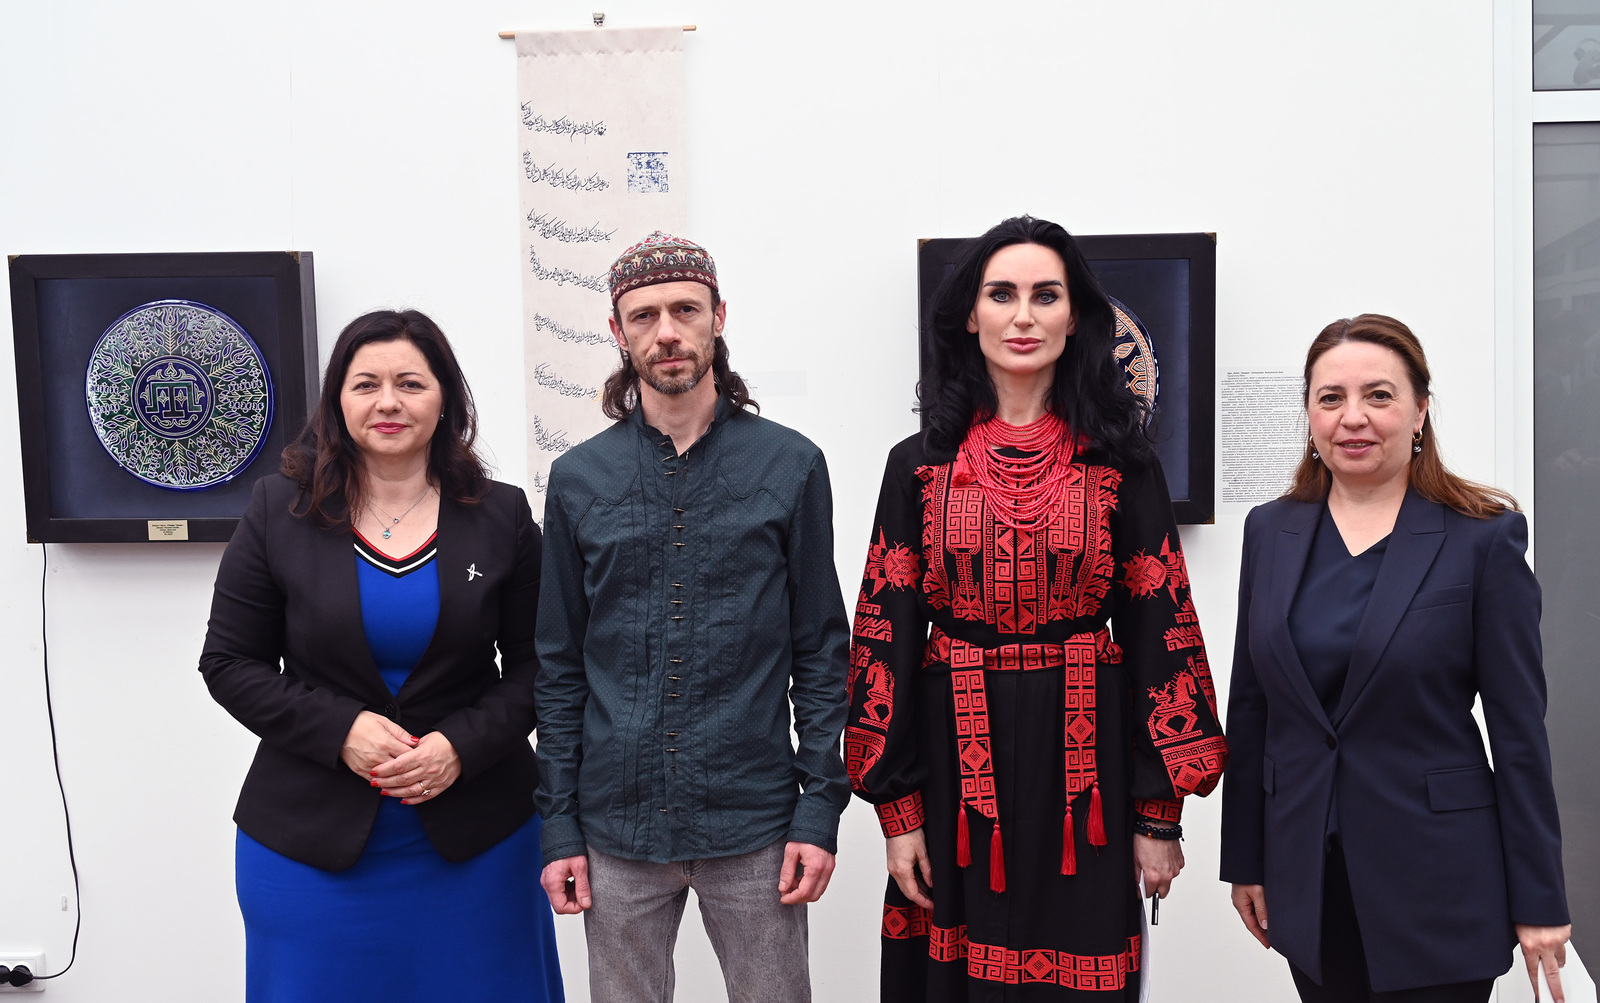 The Unique Crimean Tatar Cultural Heritage is Revealed in the Newly Opened Exhibition "Qalqan/Shield" in the "Mission" Gallery 